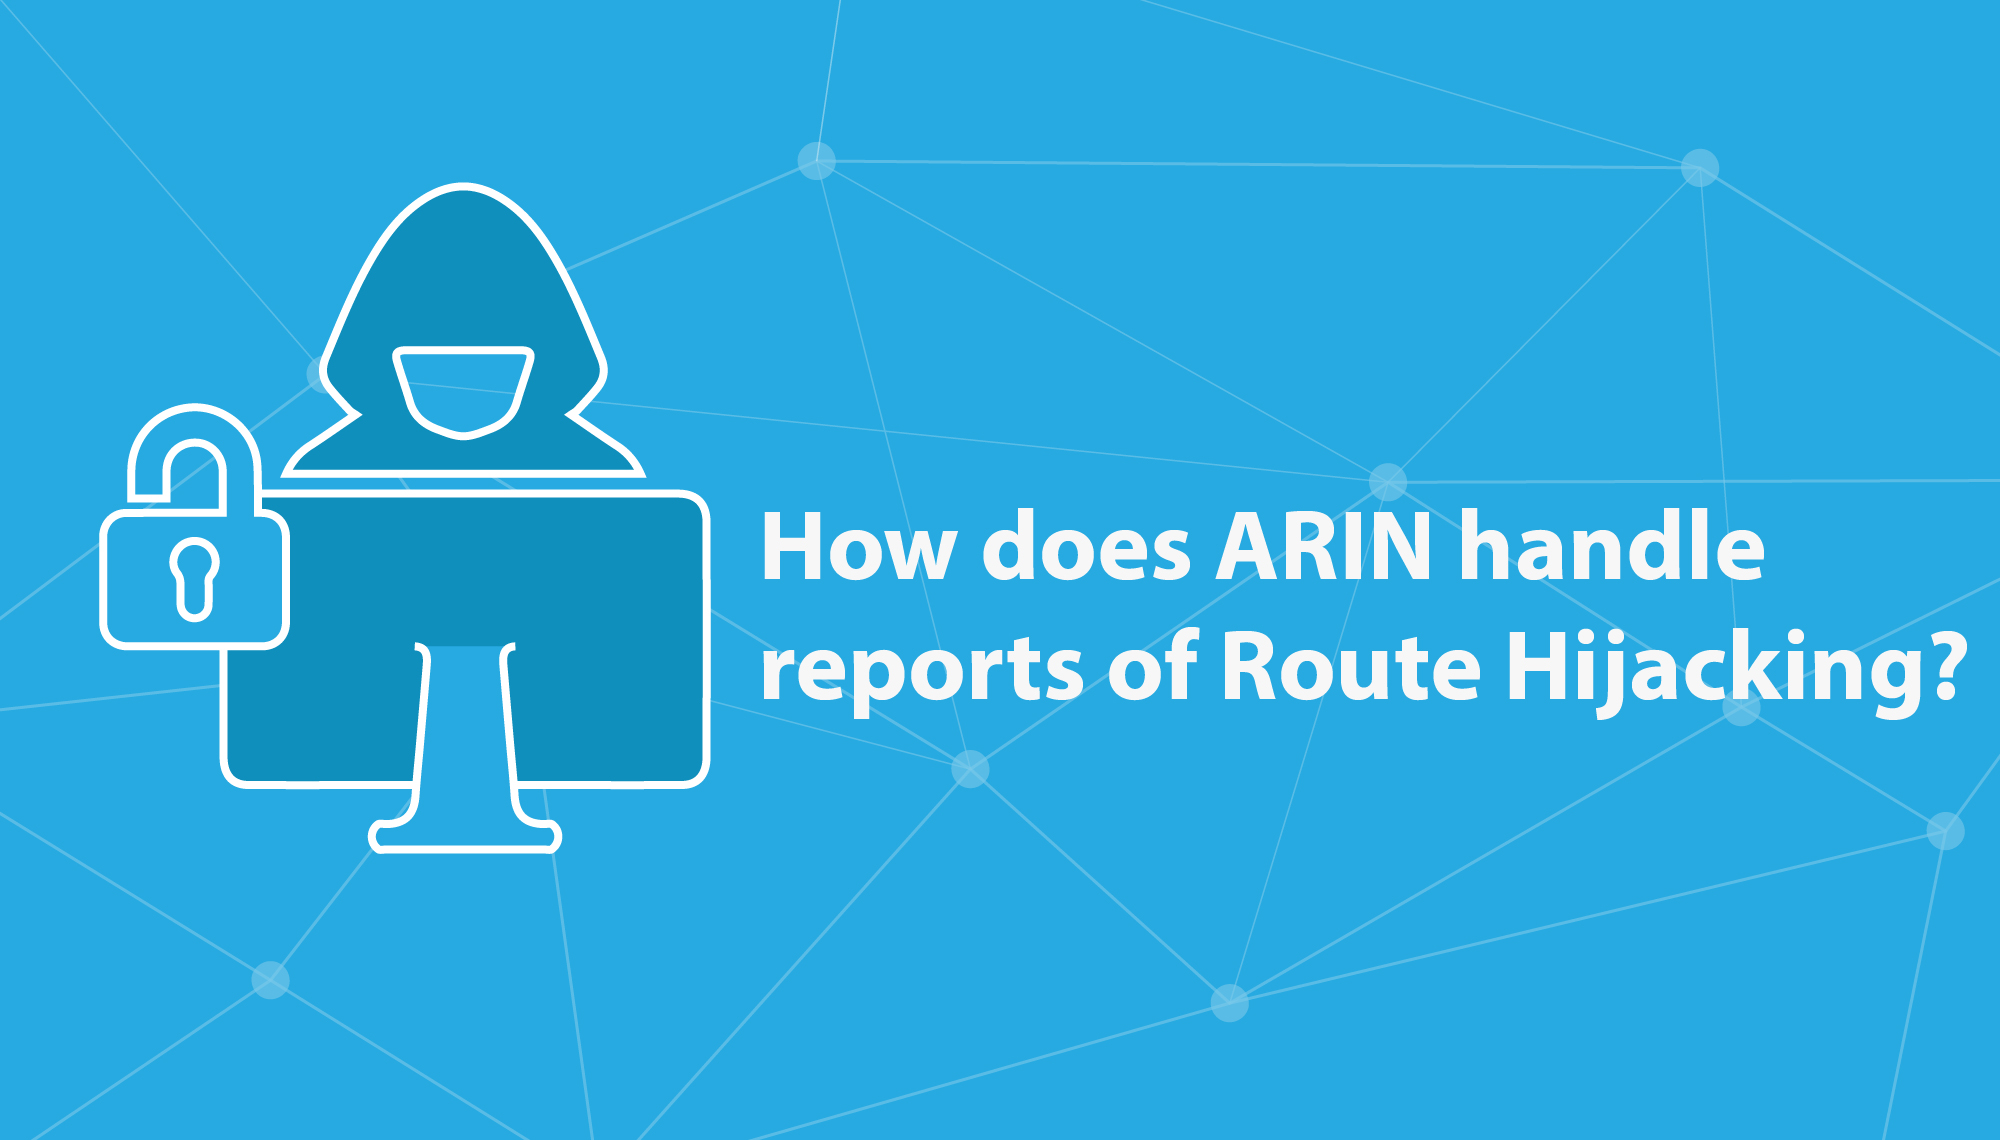 How Does ARIN Handle Reports of Route Hijacking?